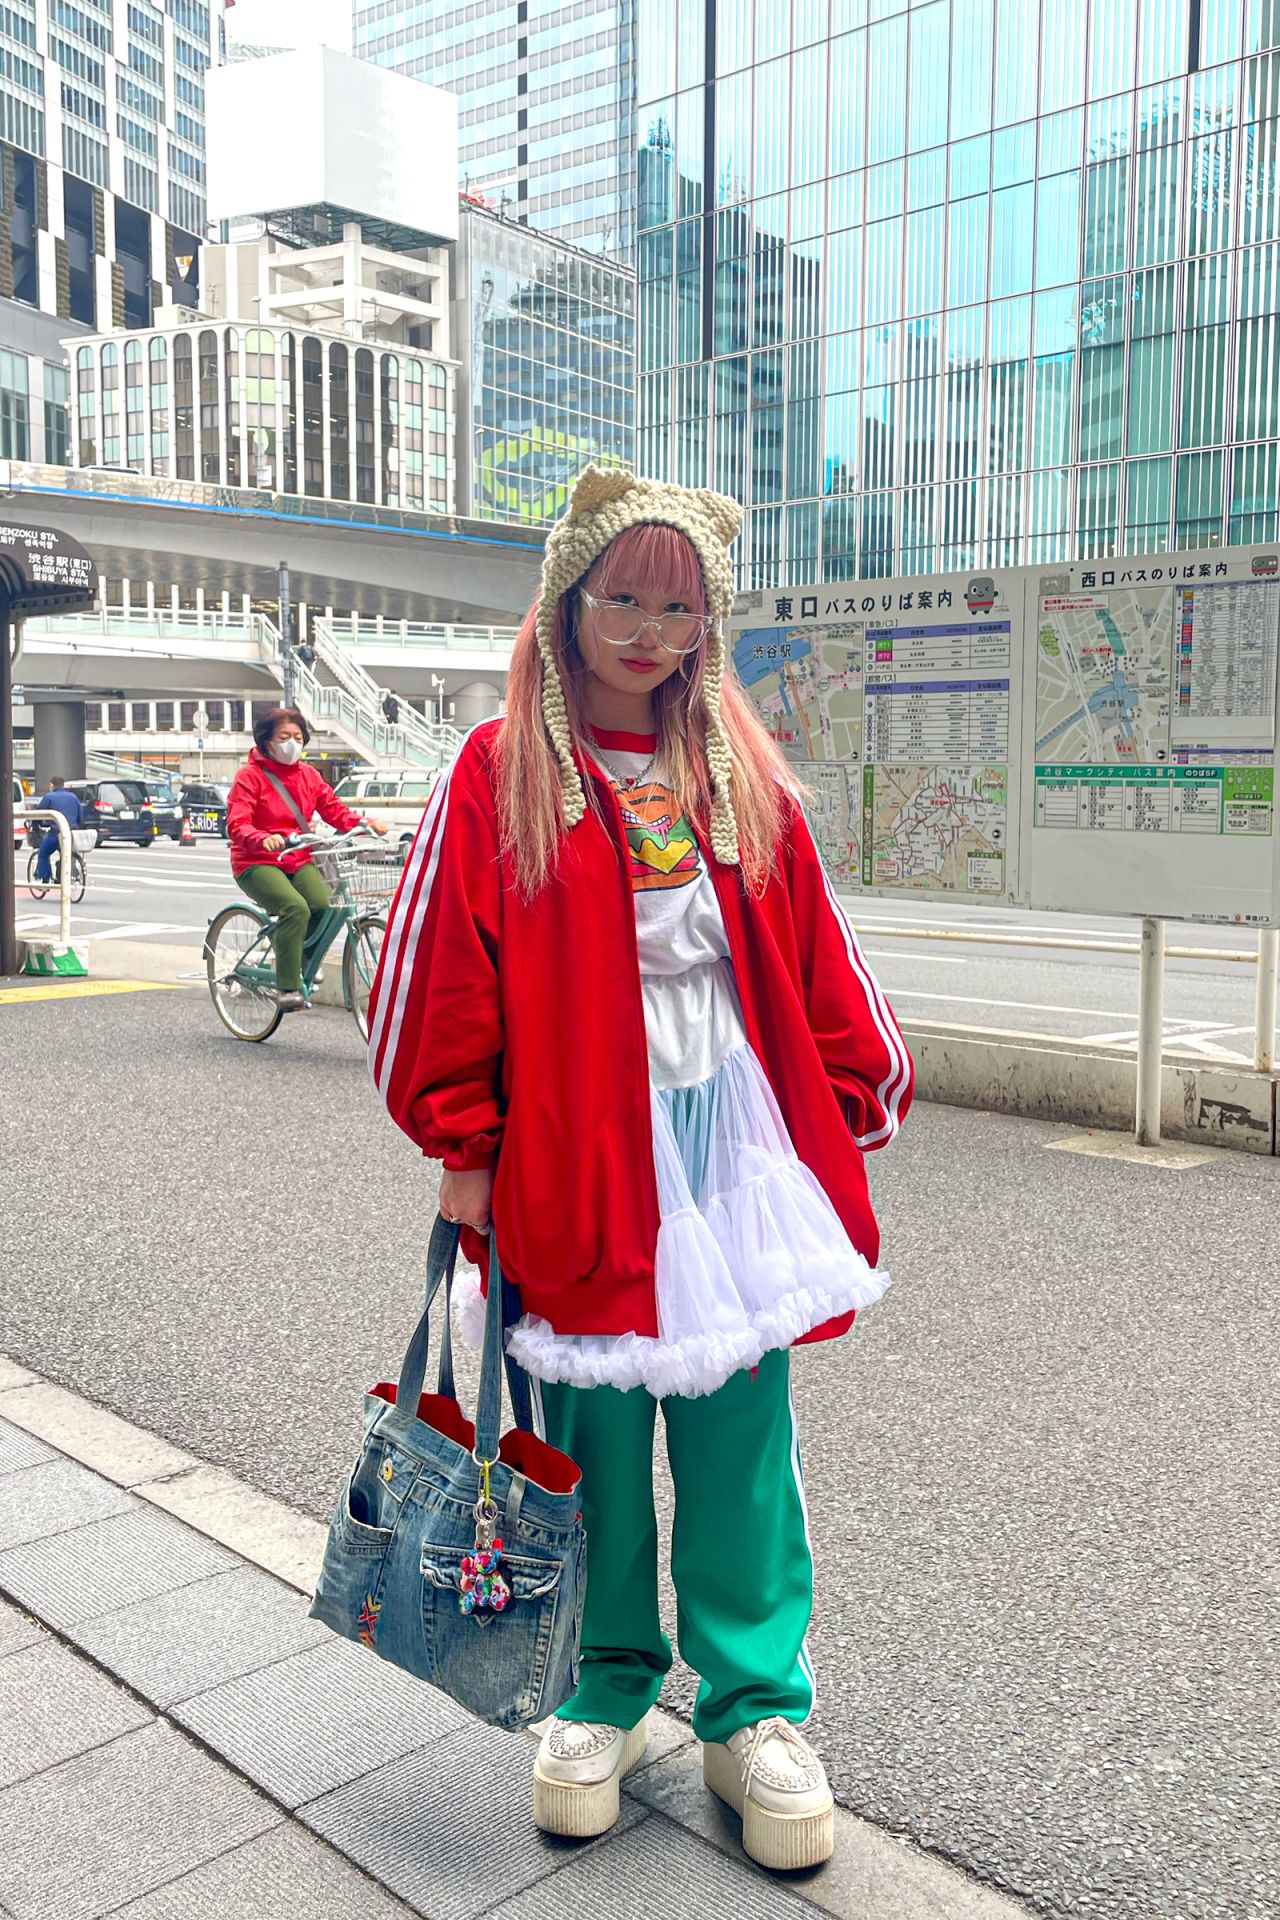 Akane, who didn't provide her surname out of concern for her privacy, described her outfit as "salty and sweet." Her ensemble comprised a tracksuit worn over a baby tee with a print of a hamburger and a frilly white skirt. 